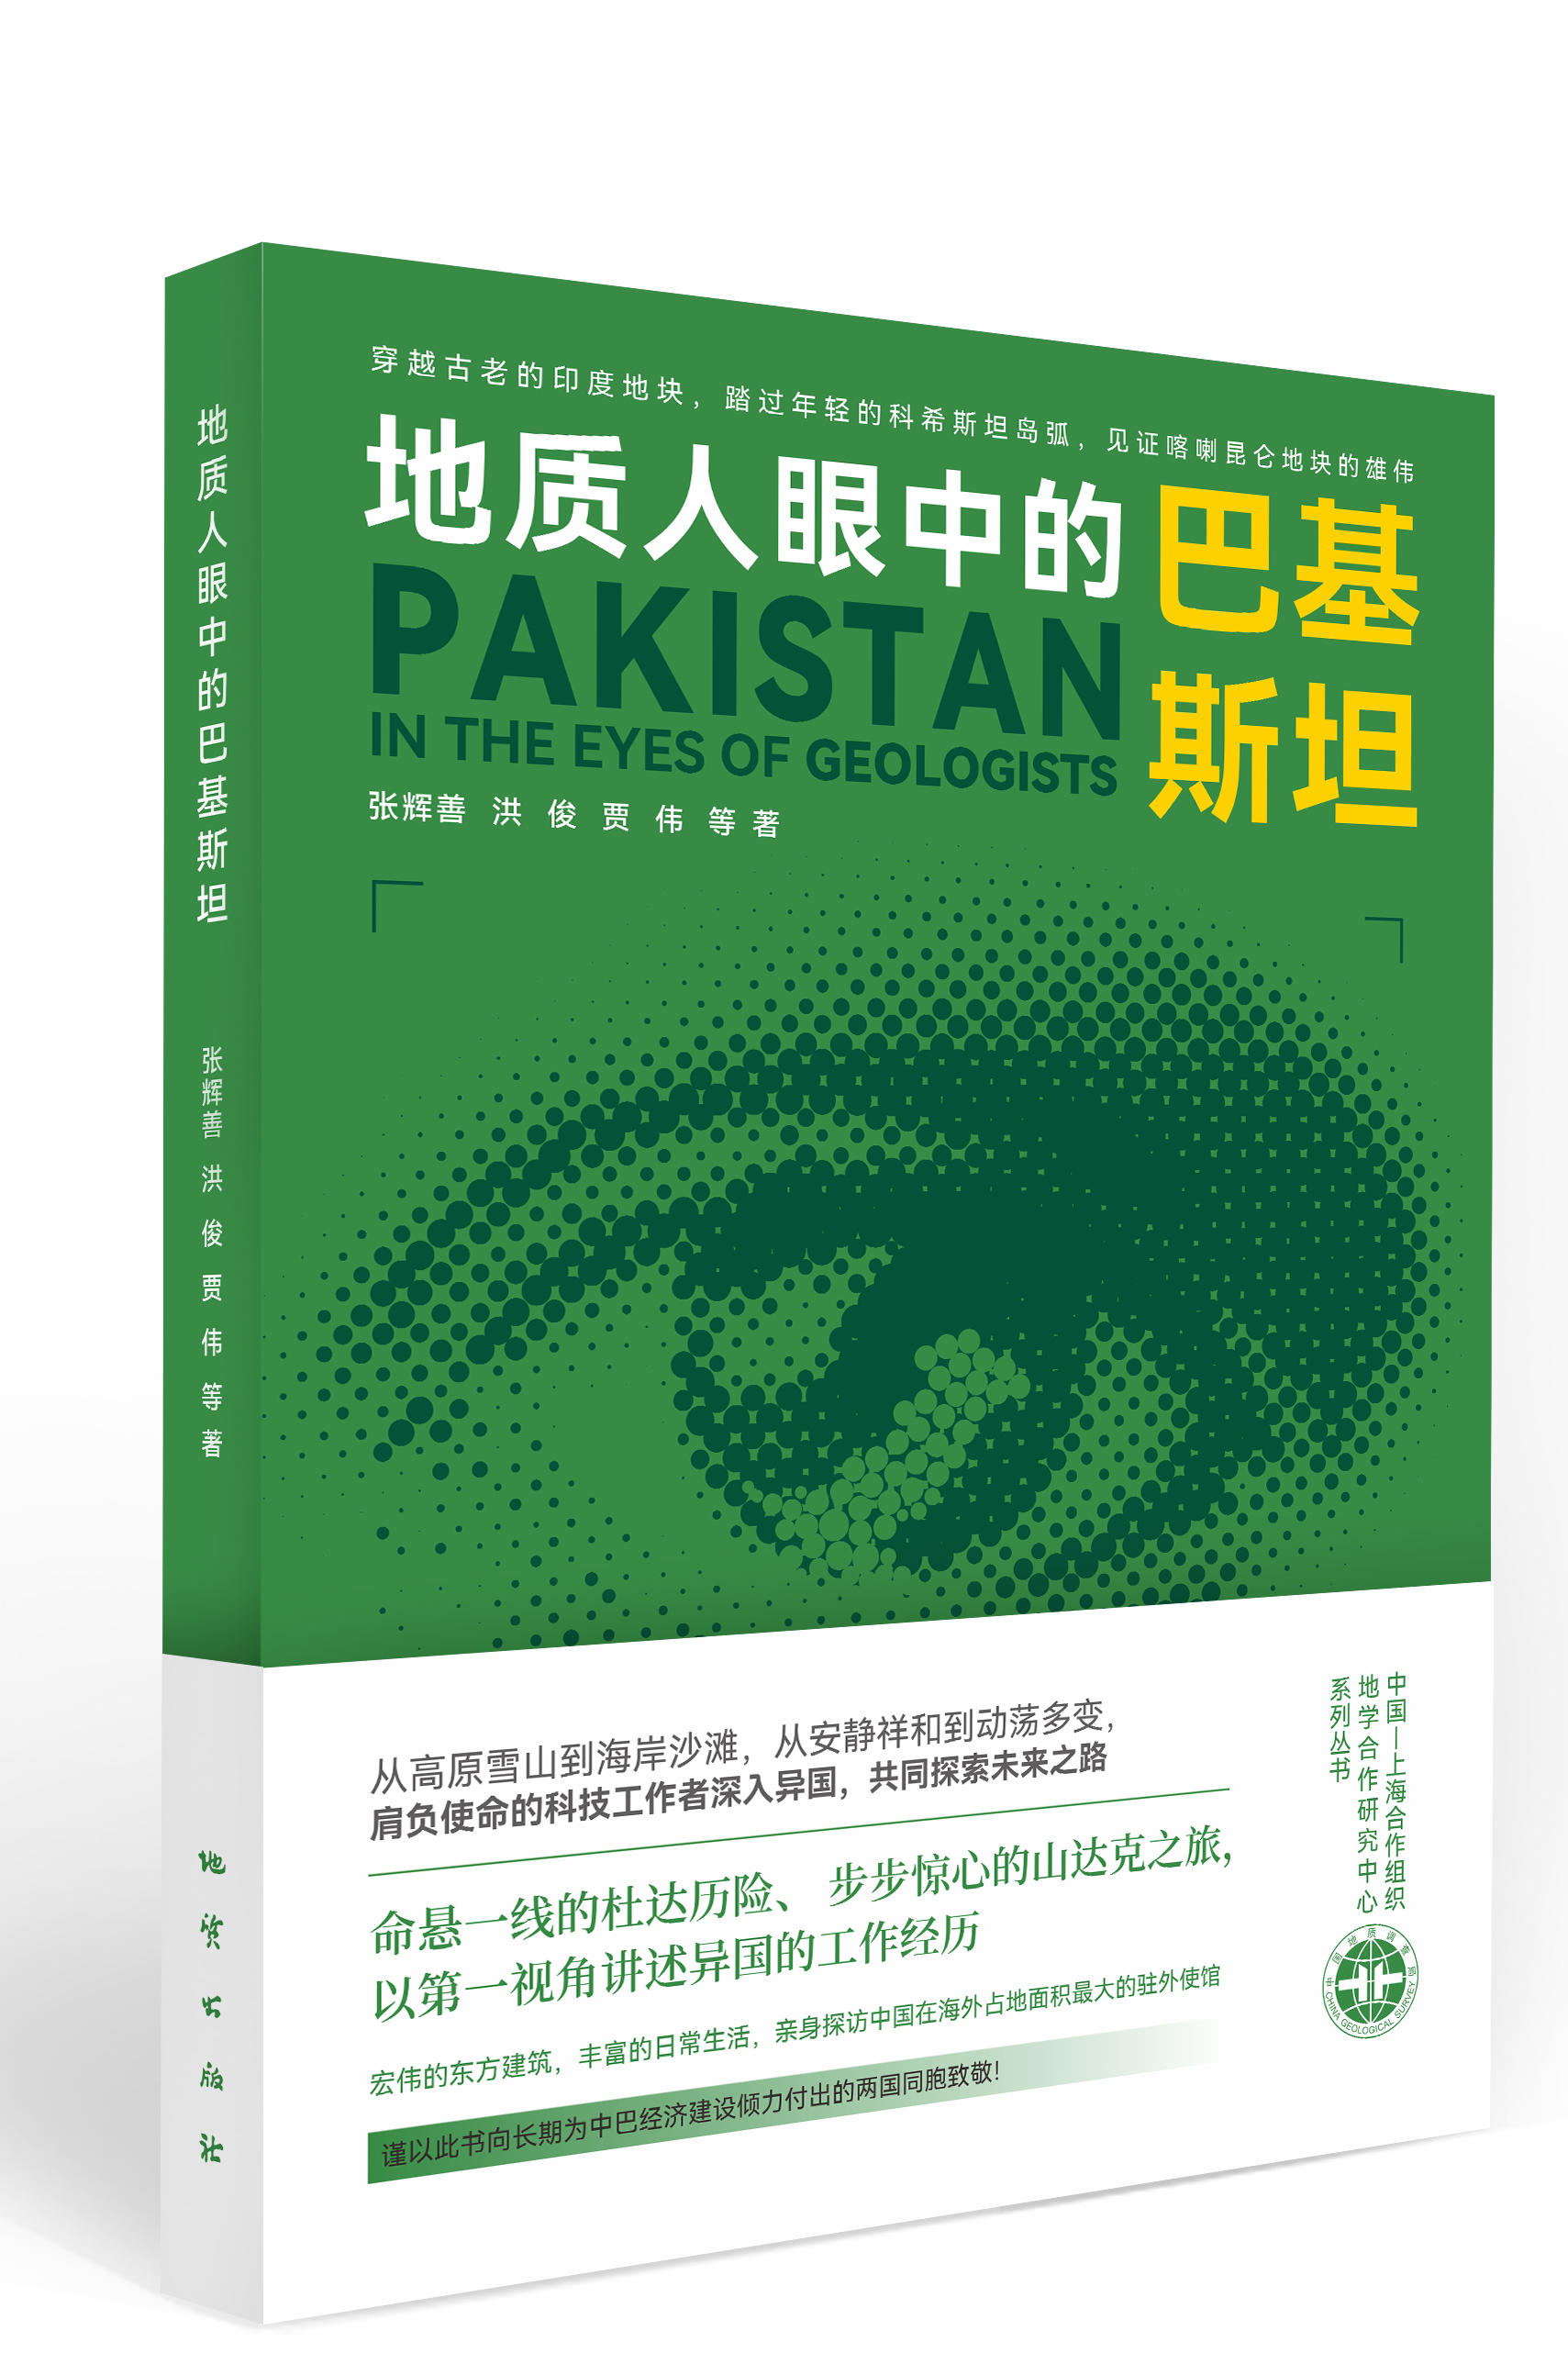 Book of Pakistan in the eyes of geologists published in China